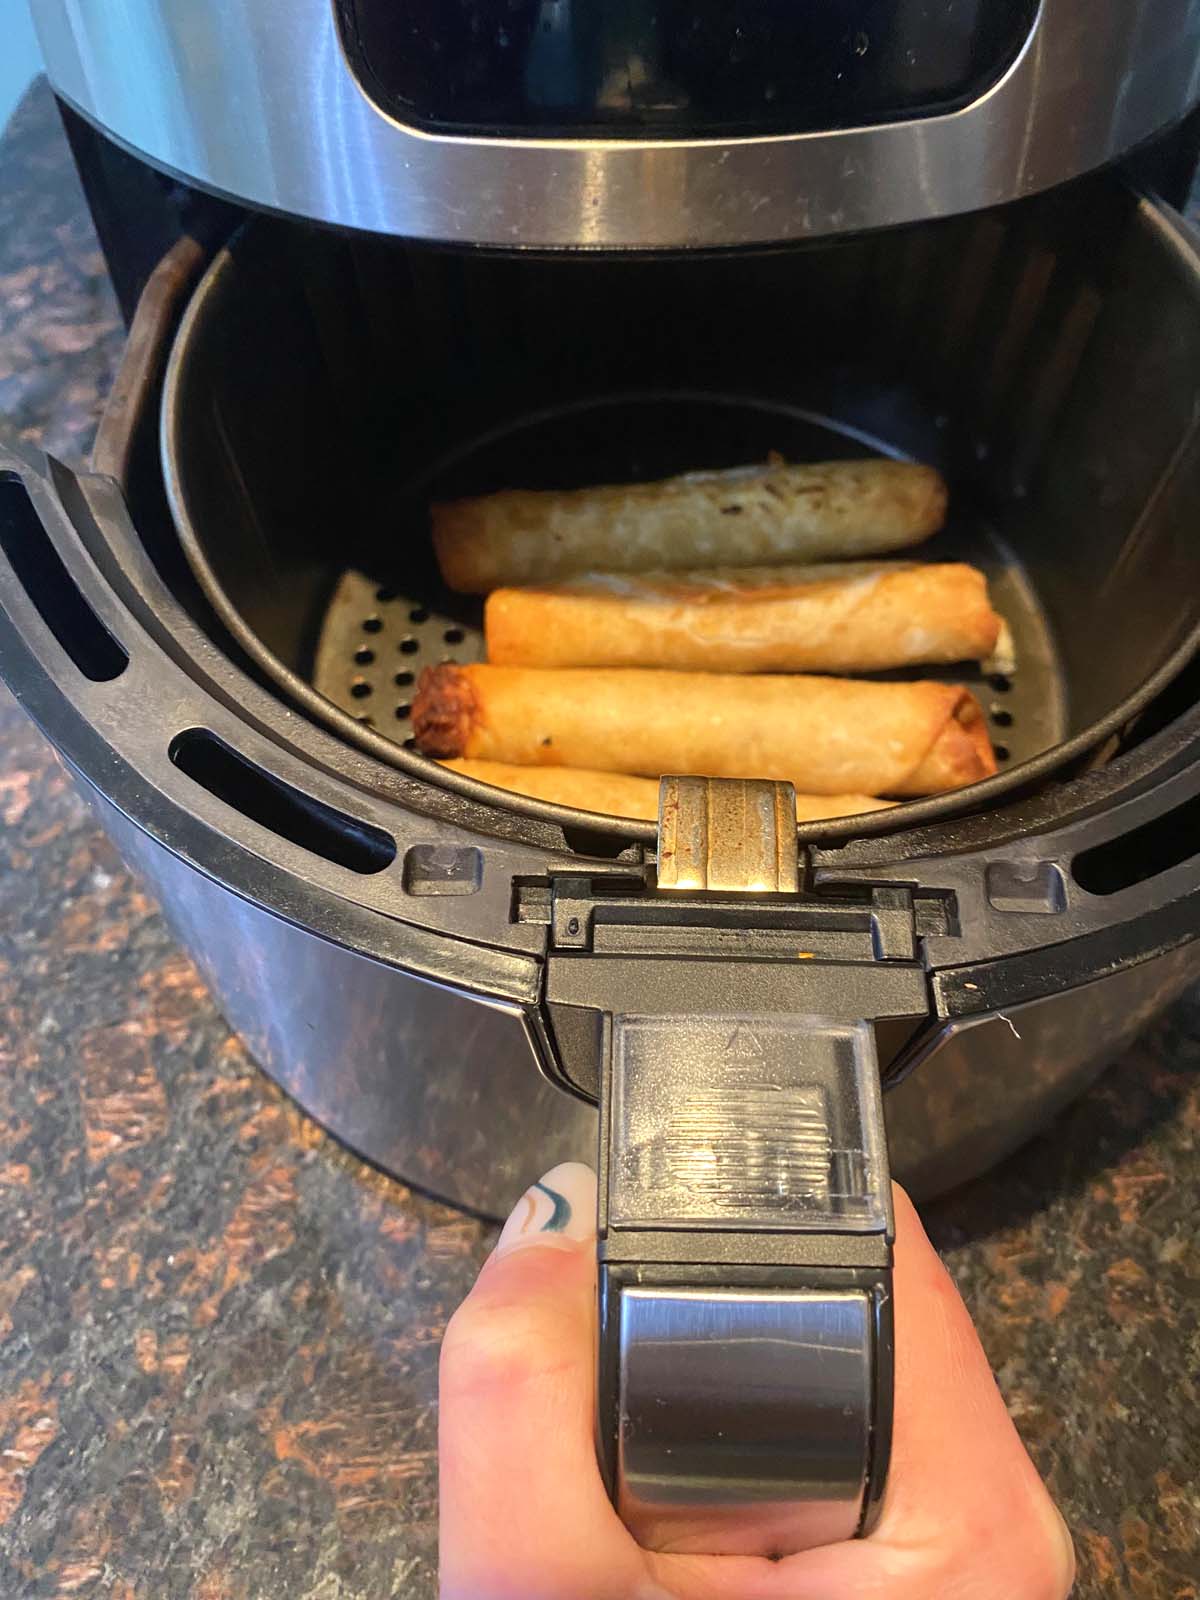 Cooked flautas in an air fryer.